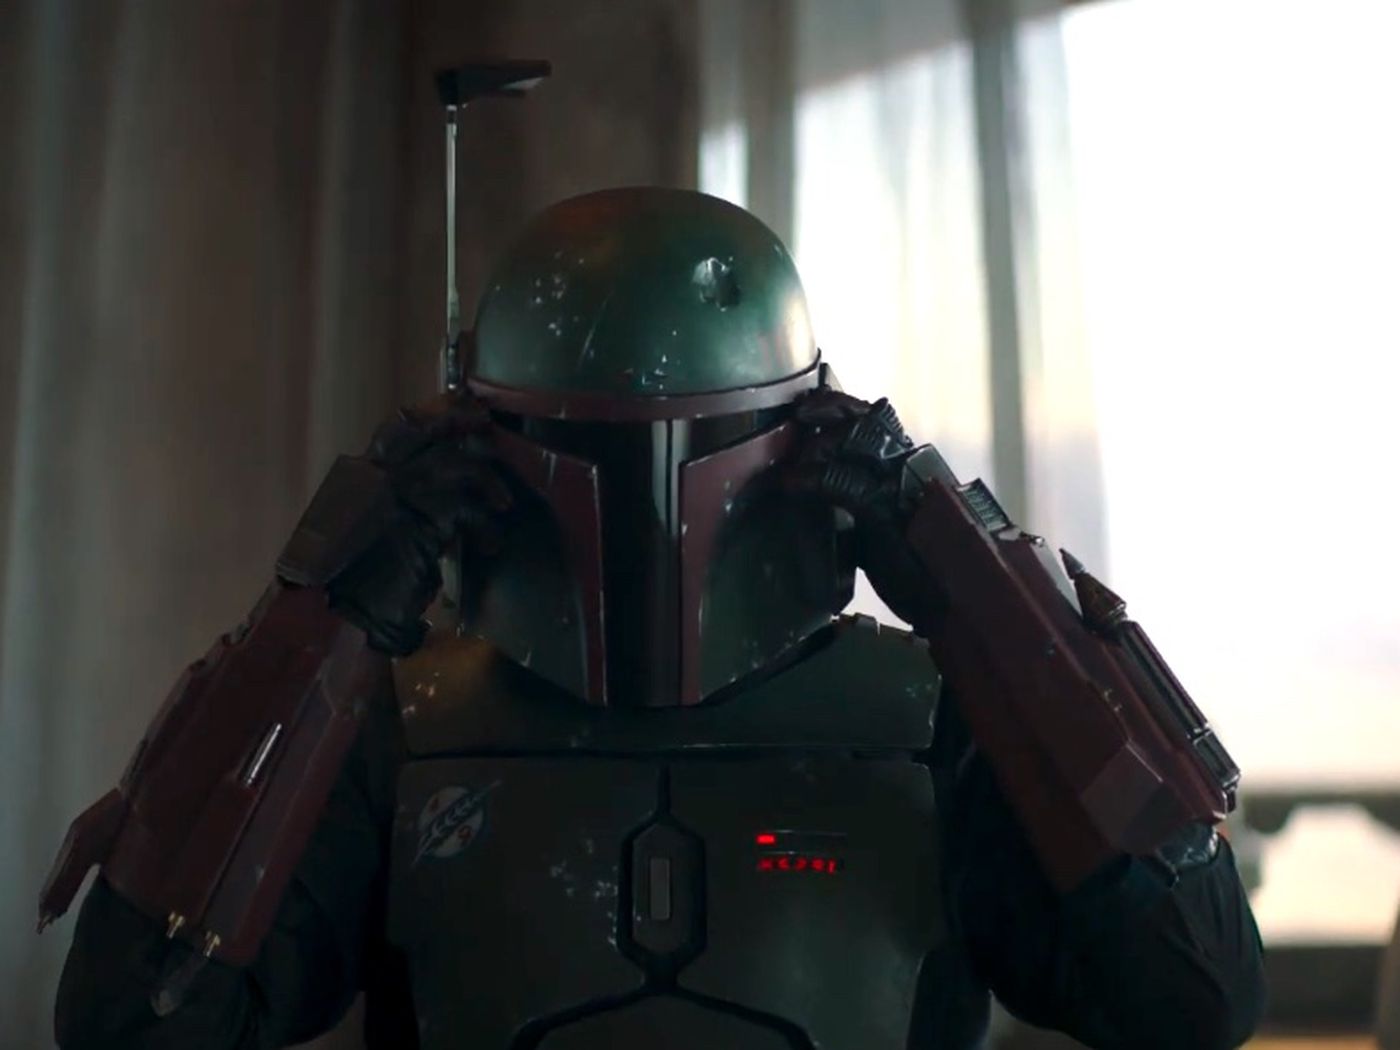 Book of Boba Fett trailer turns the Star Wars icon into the Godfather